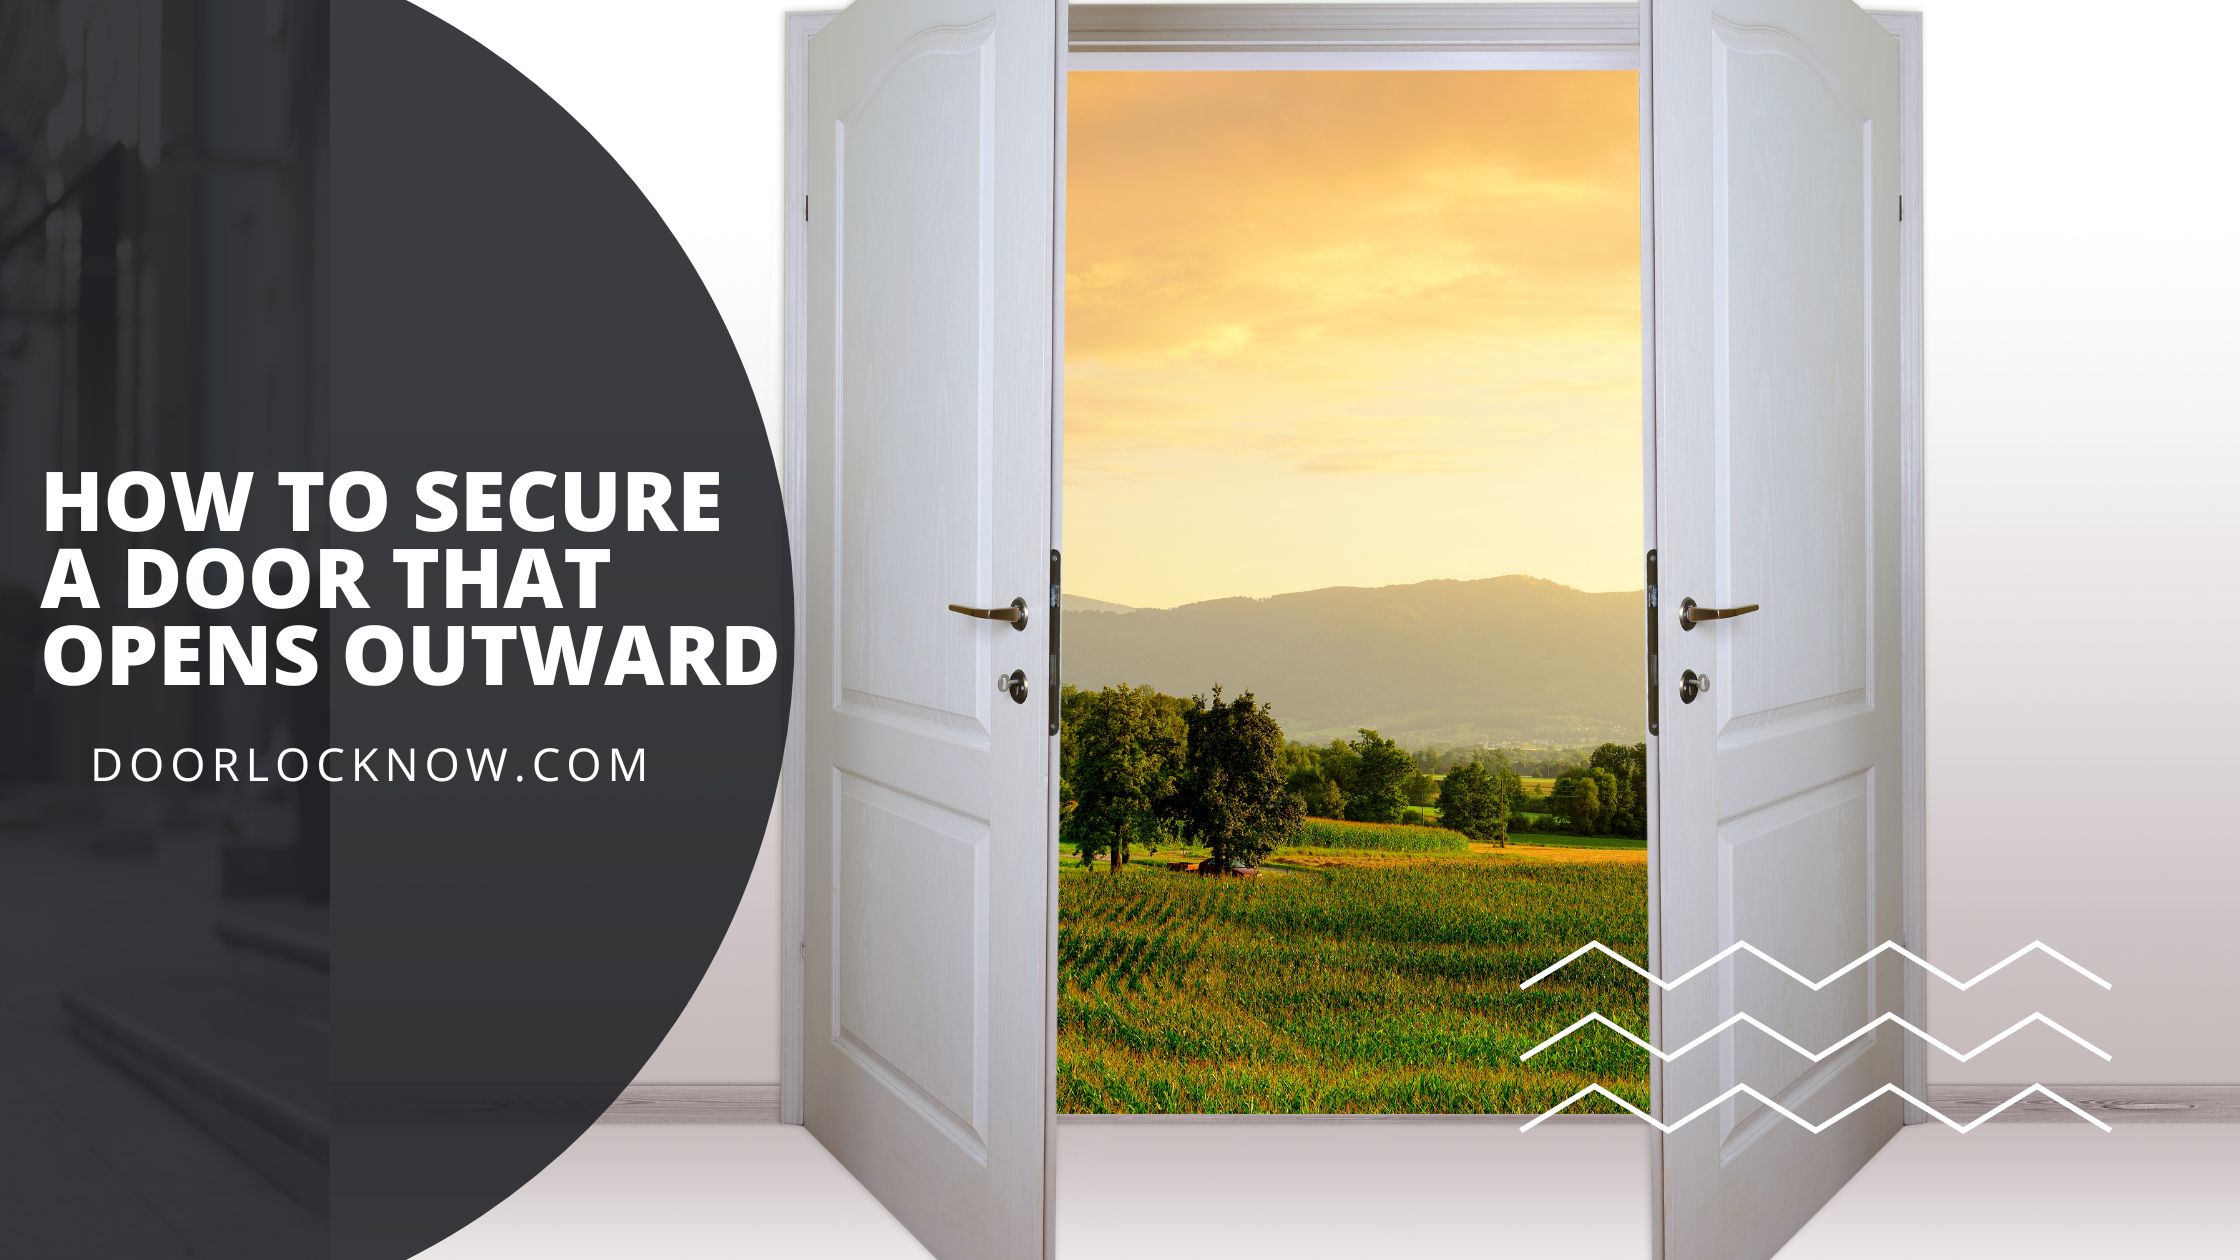 How to Secure a Door That Opens Outward